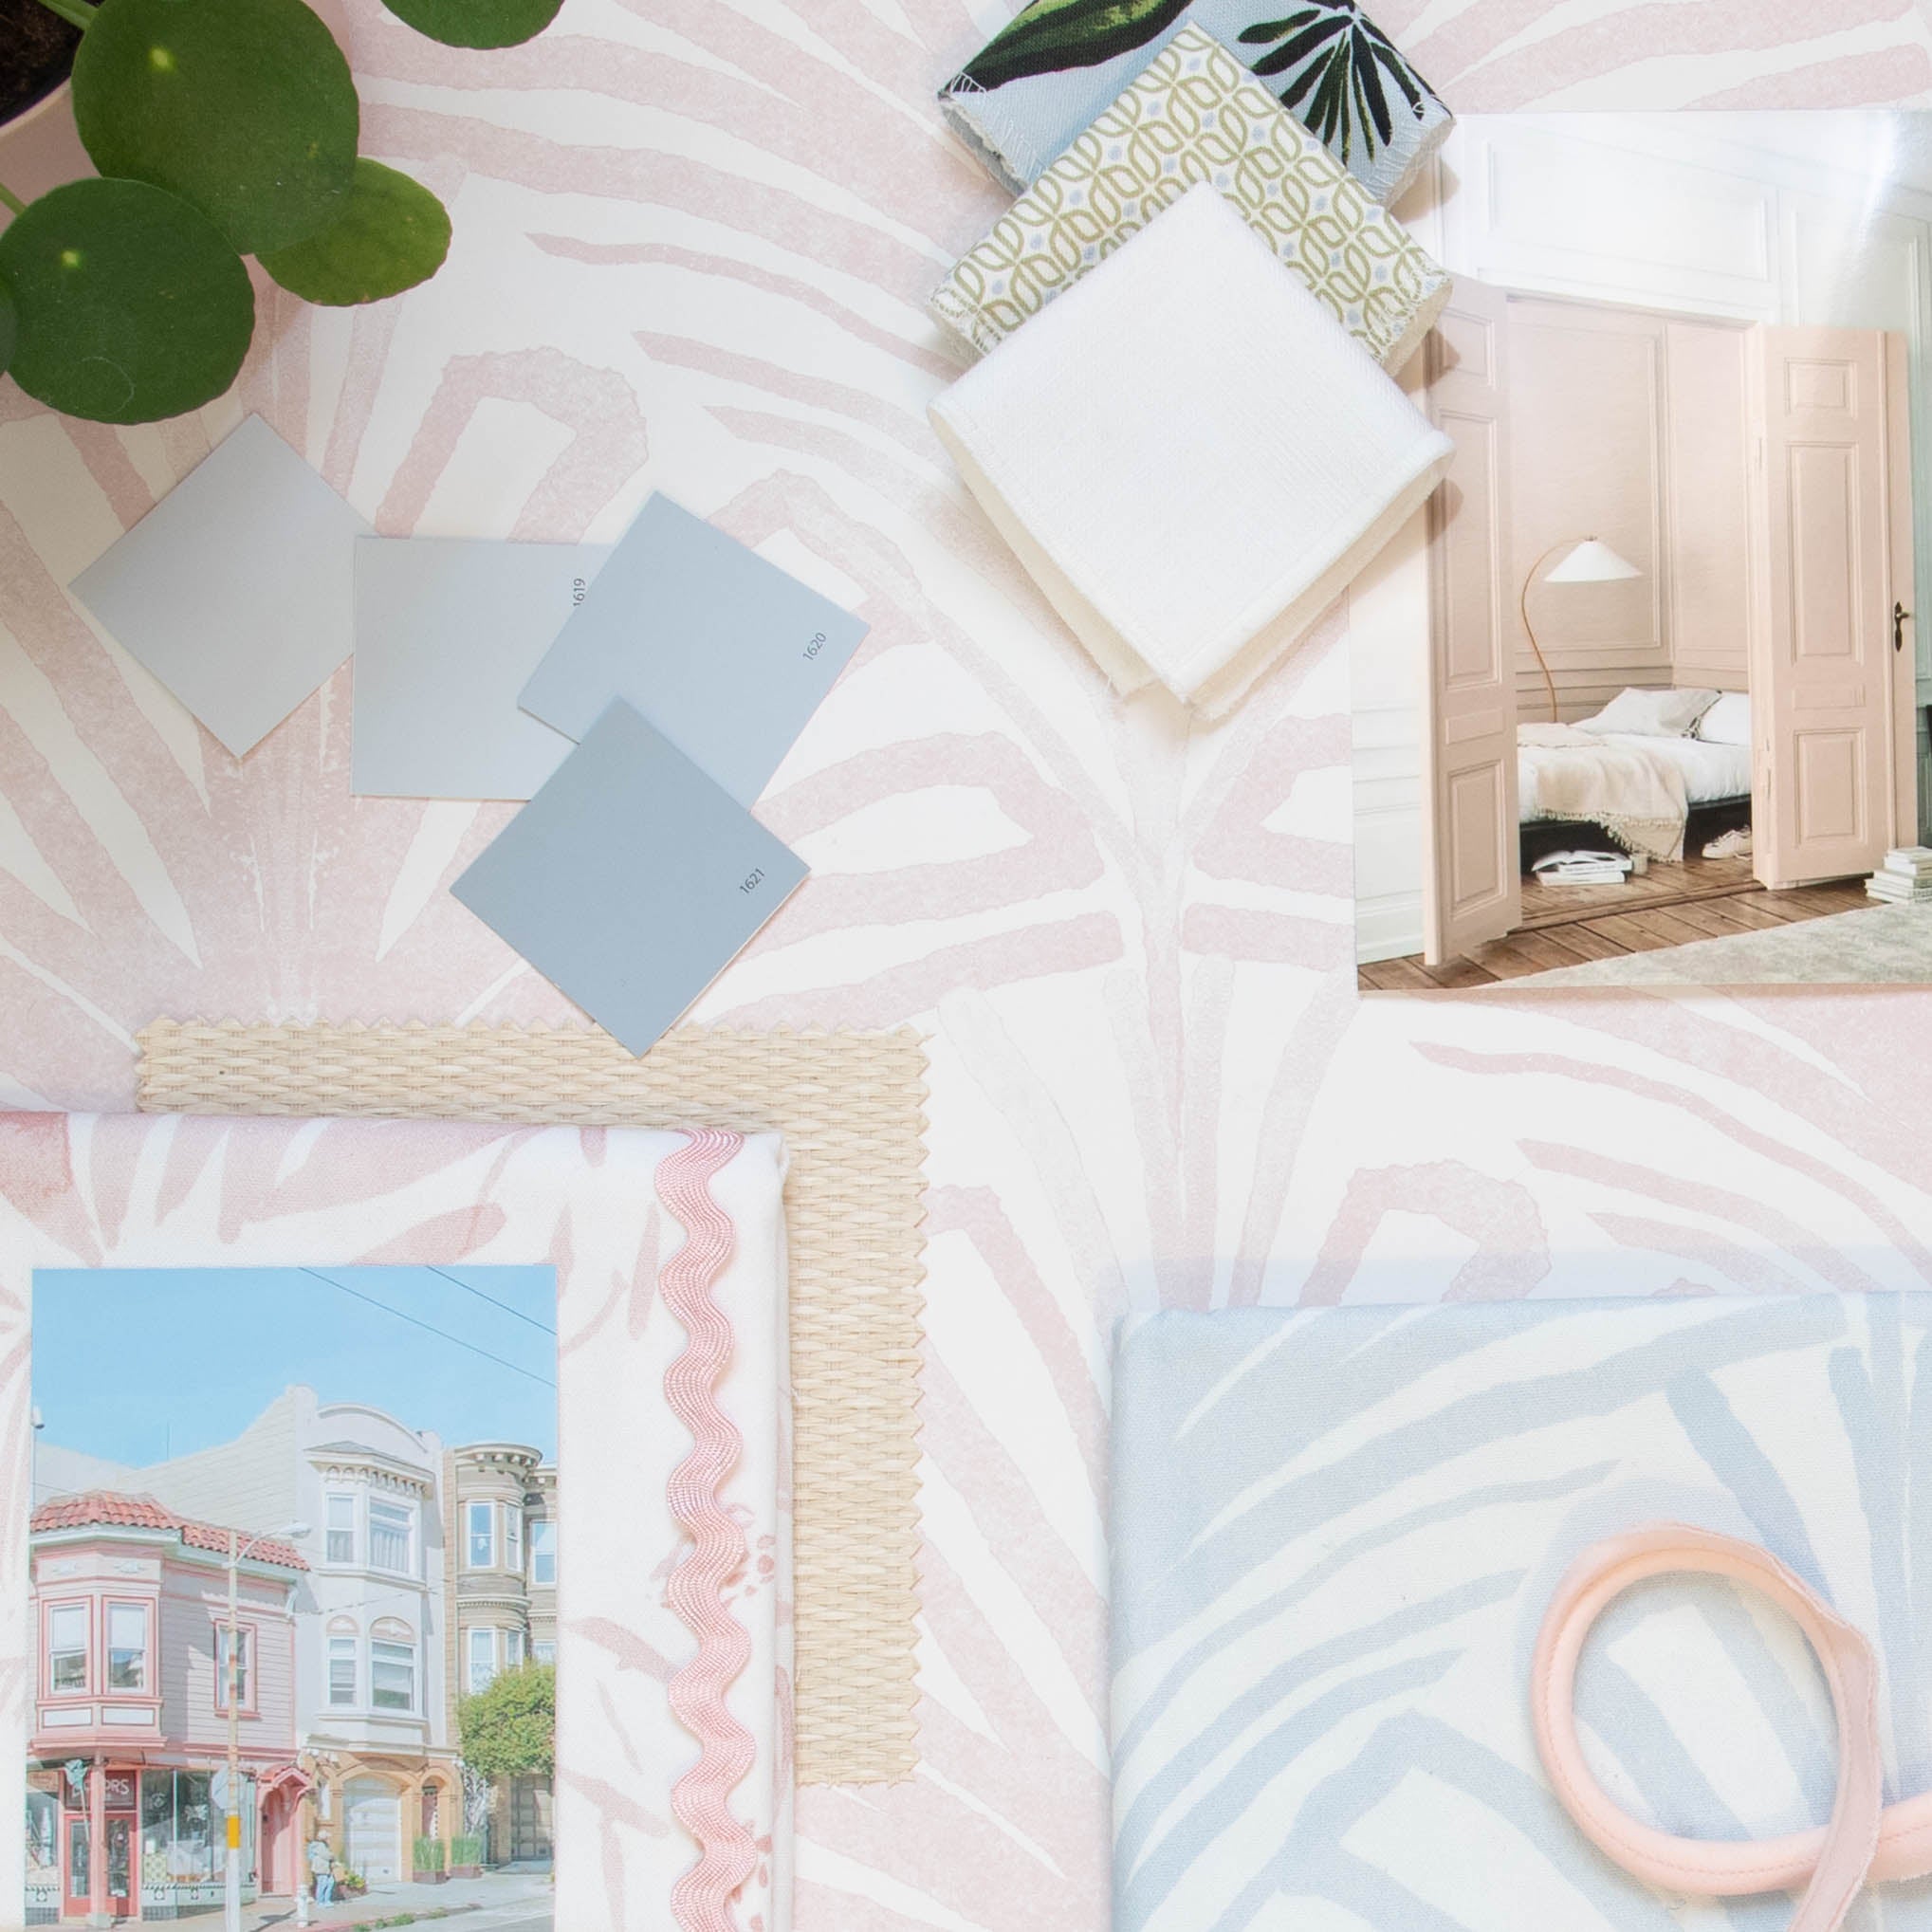 Interior design moodboard and fabric inspirations with Rose Pink Palm Printed Swatch, Sky Blue Palm Printed Swatch, and Cream Chinoiserie Printed Swatch